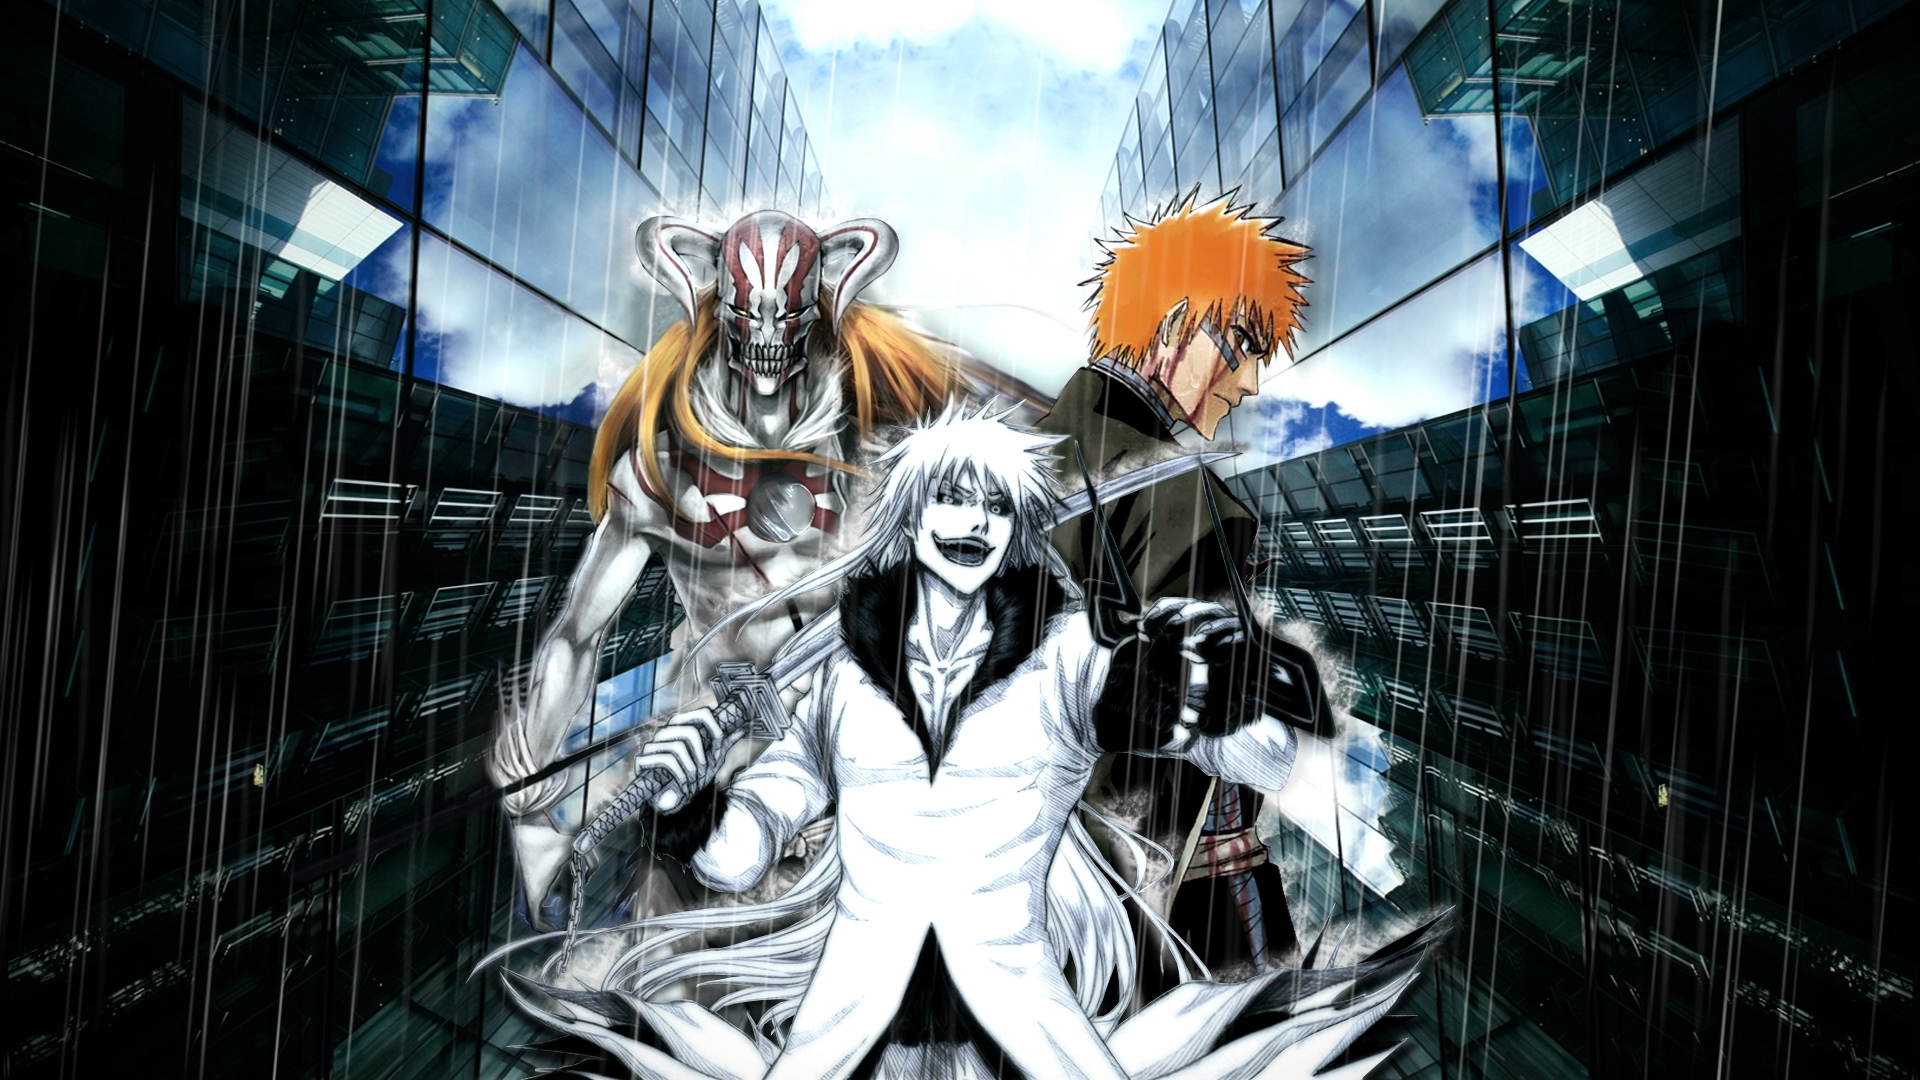 Awesome Bleach Japan Wallpaper Desktop With